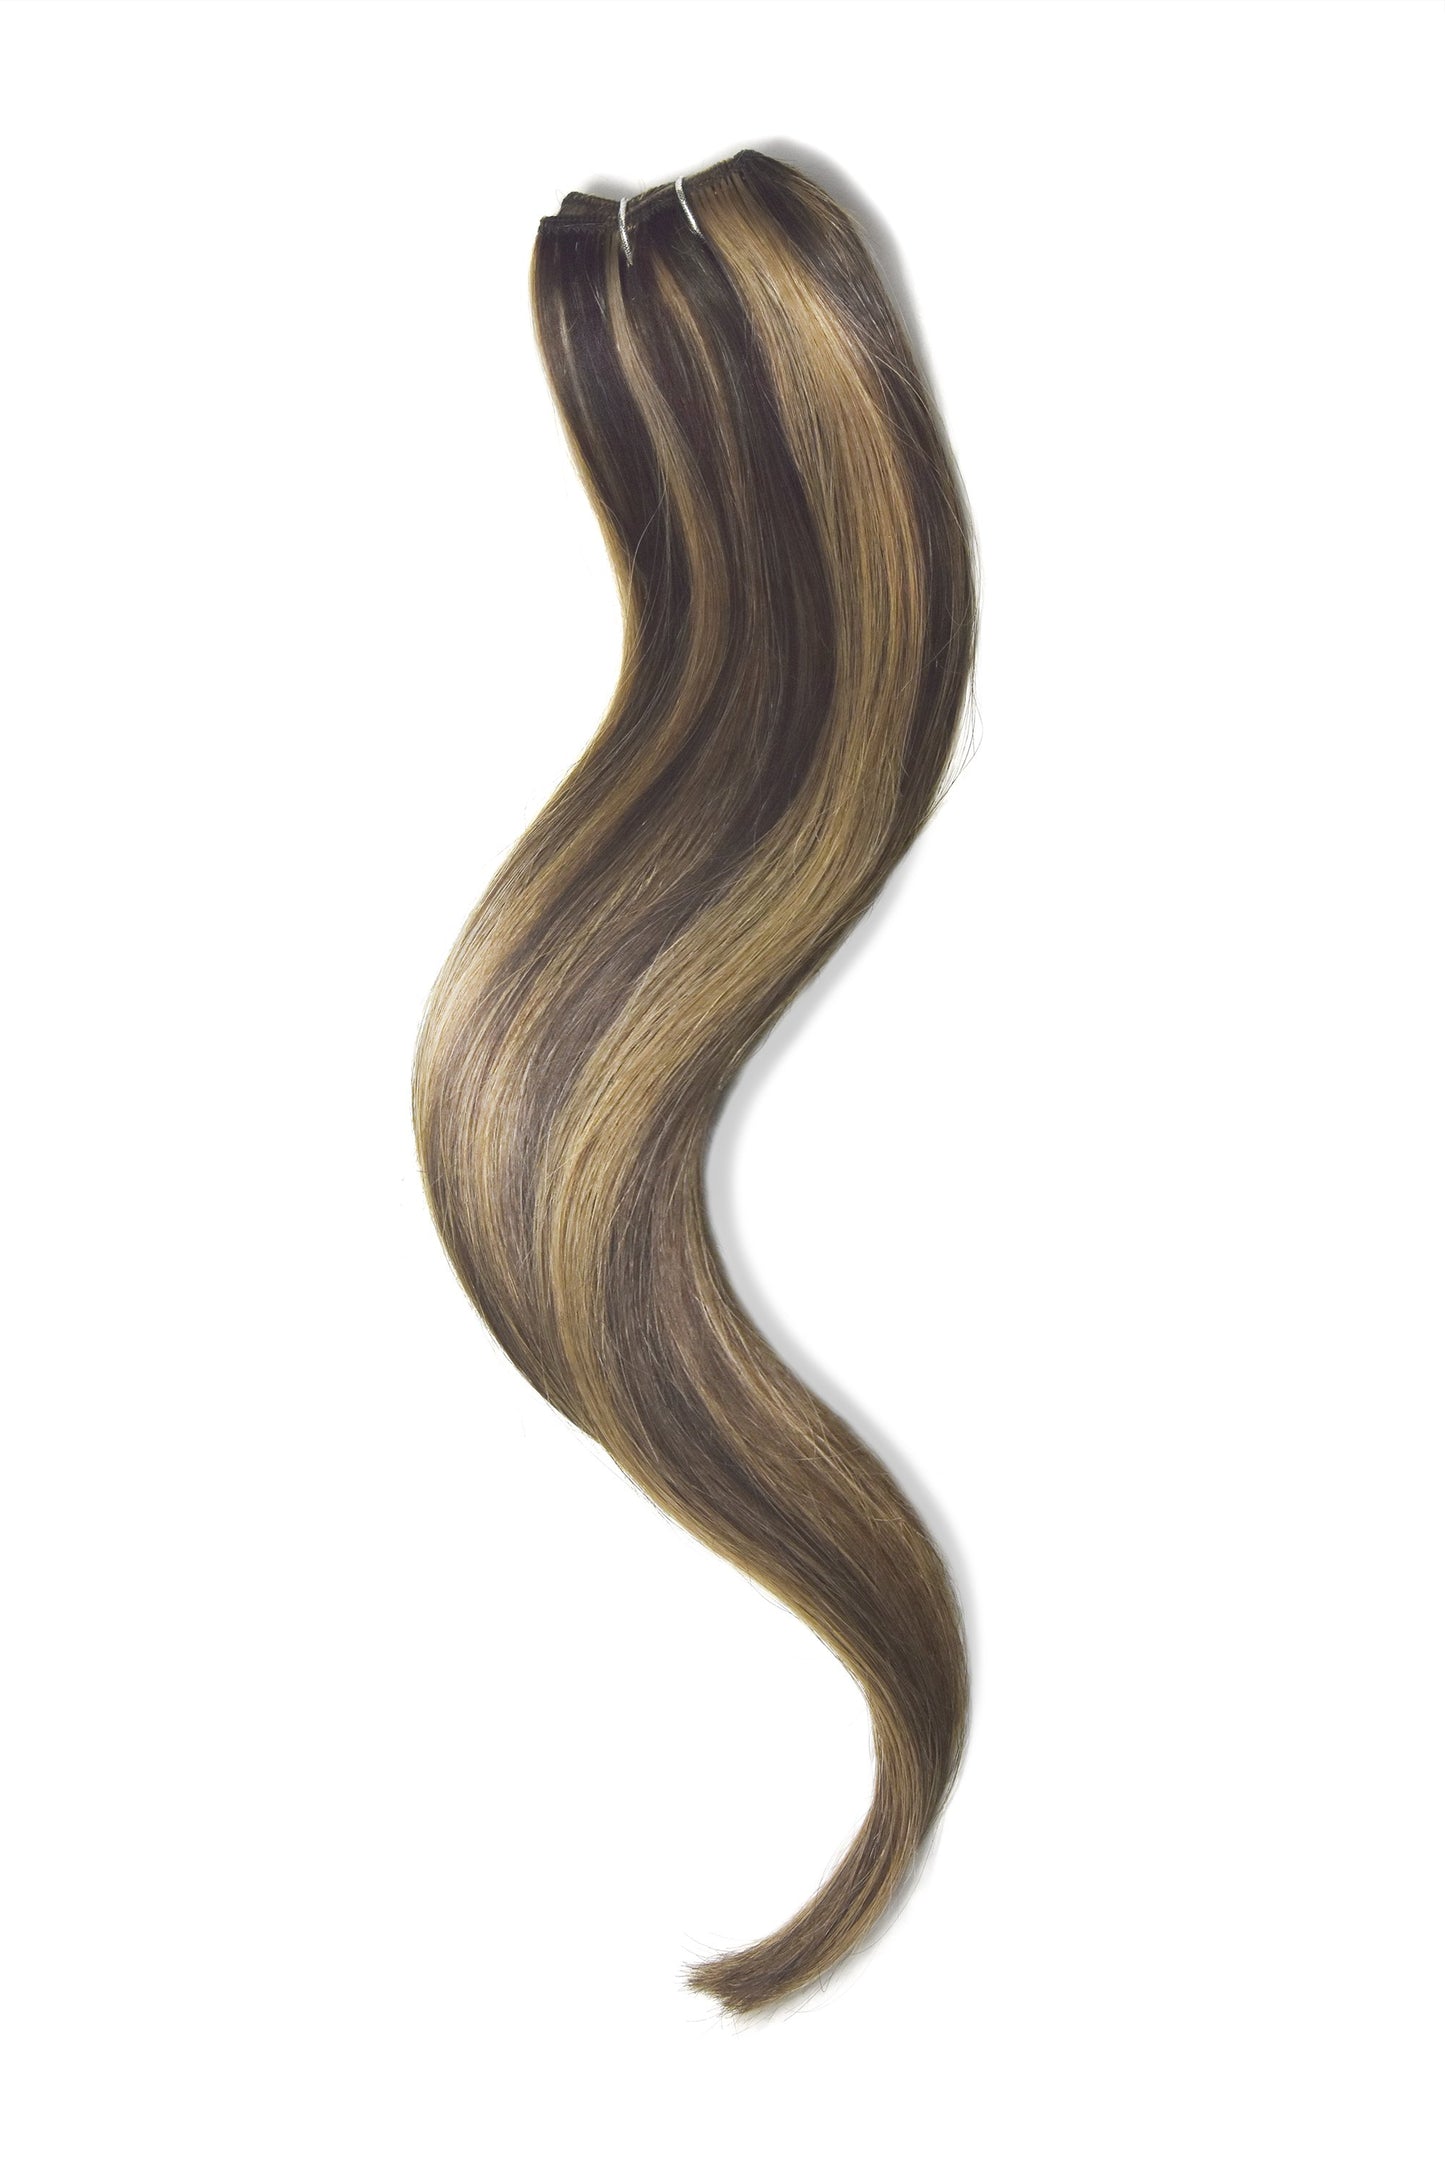 one piece clip in hair extensions 100% human hair by Cliphair™ UK